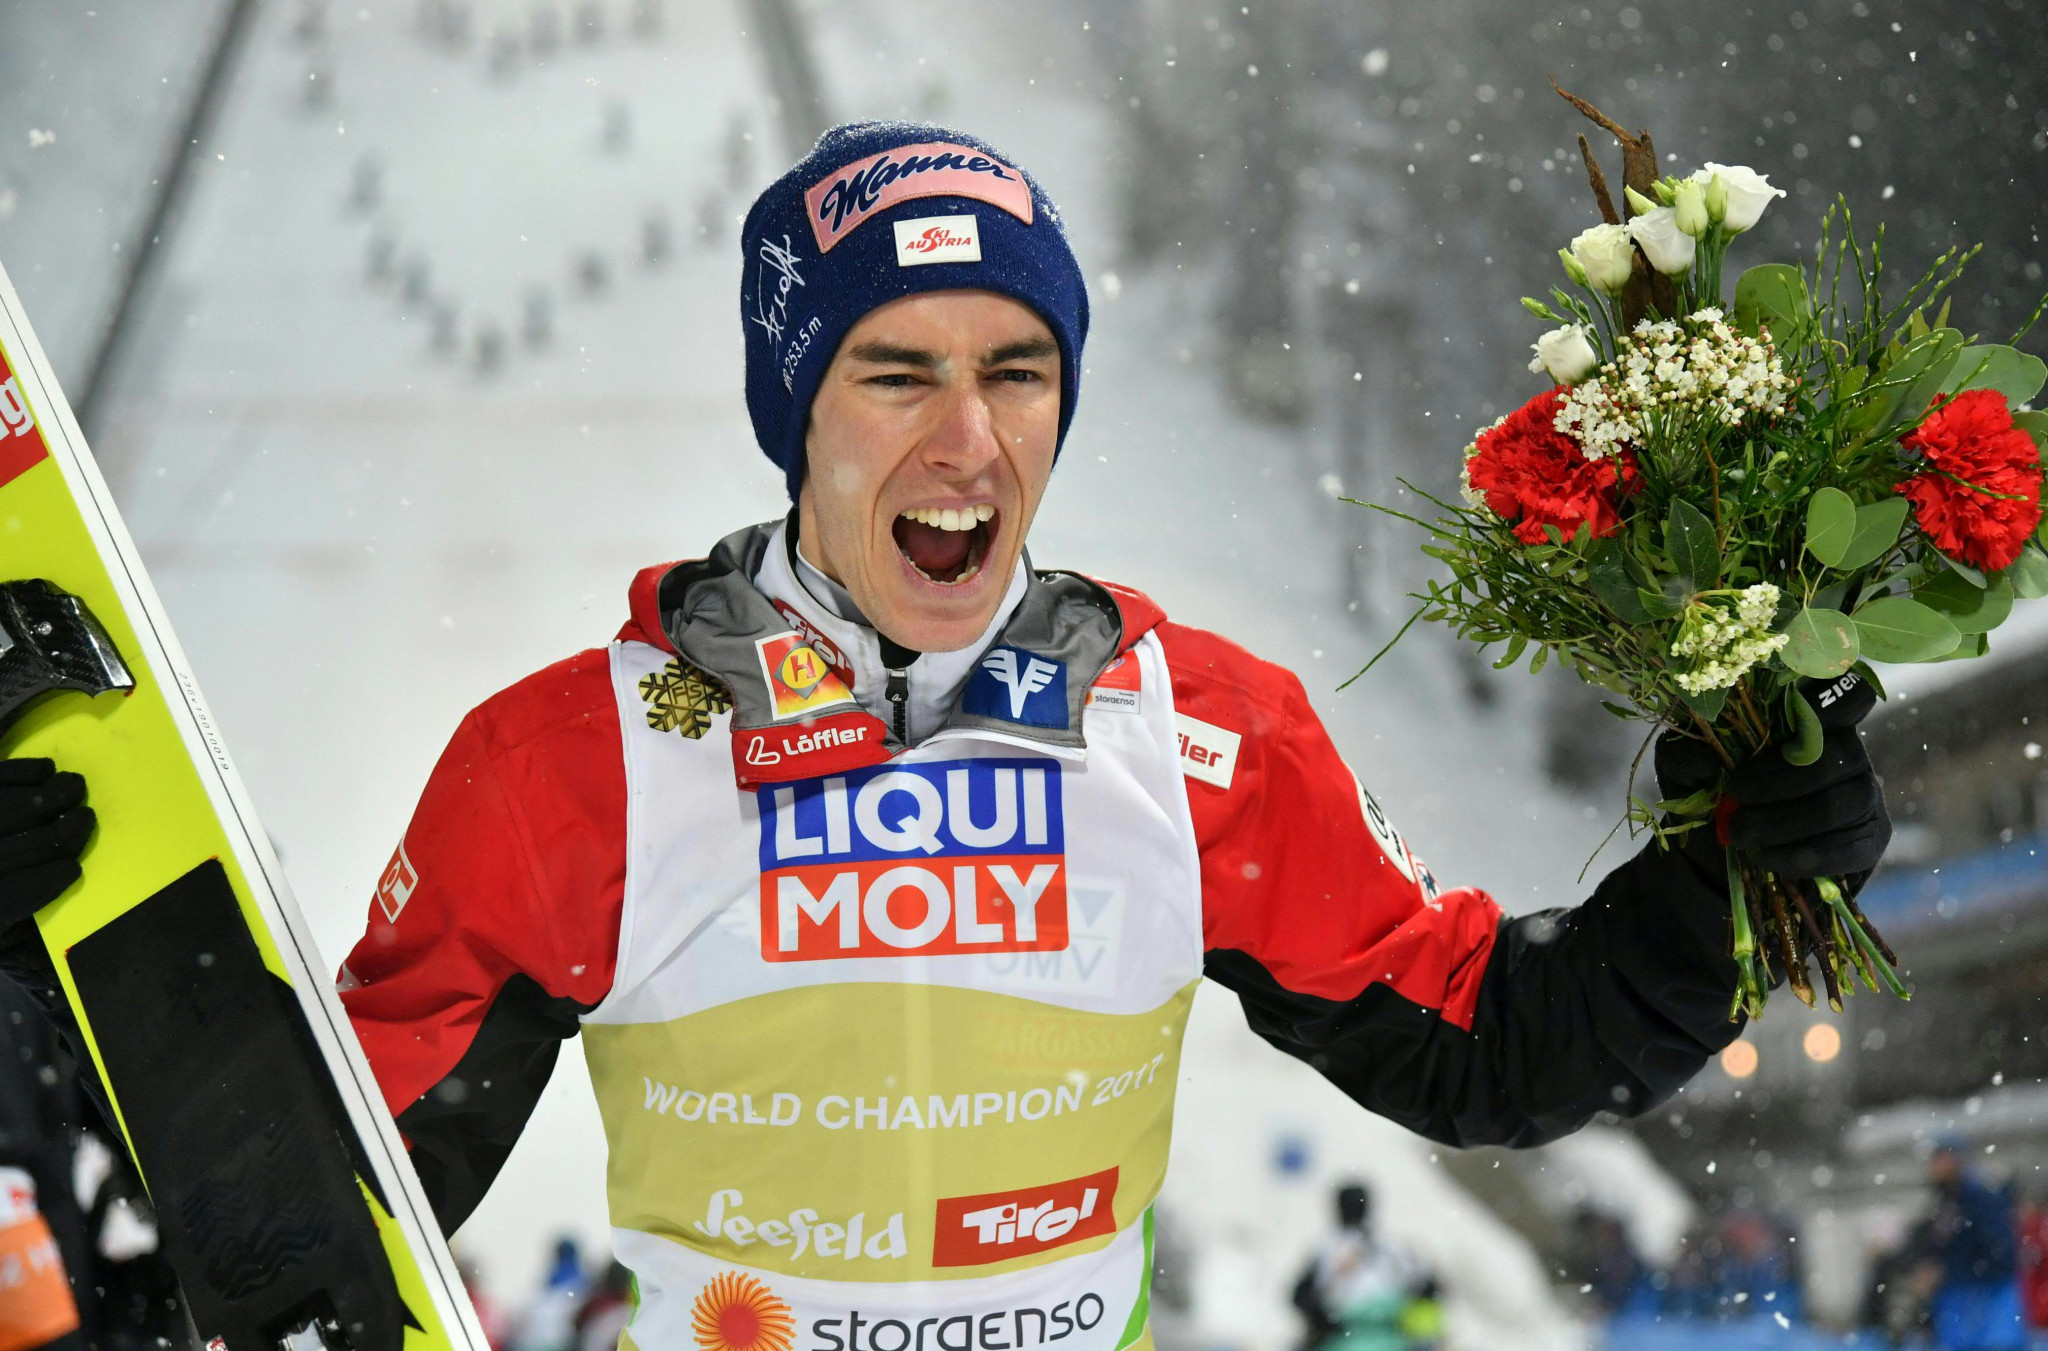 Austria's Stefan Kraft did enough for the bronze medal ©Getty Images